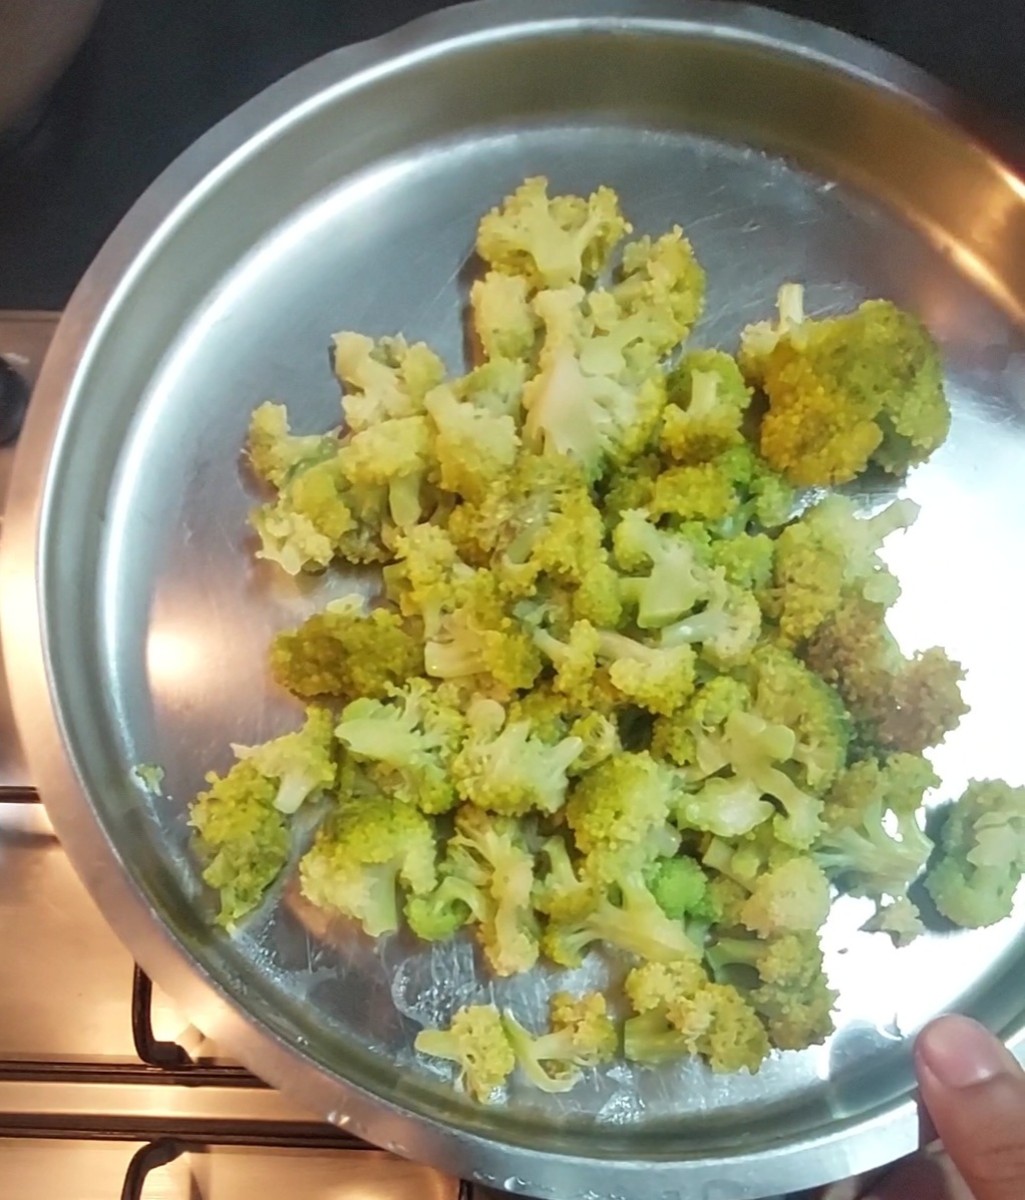 Drain off the water from the cooked broccoli, transfer to a plate and set aside.